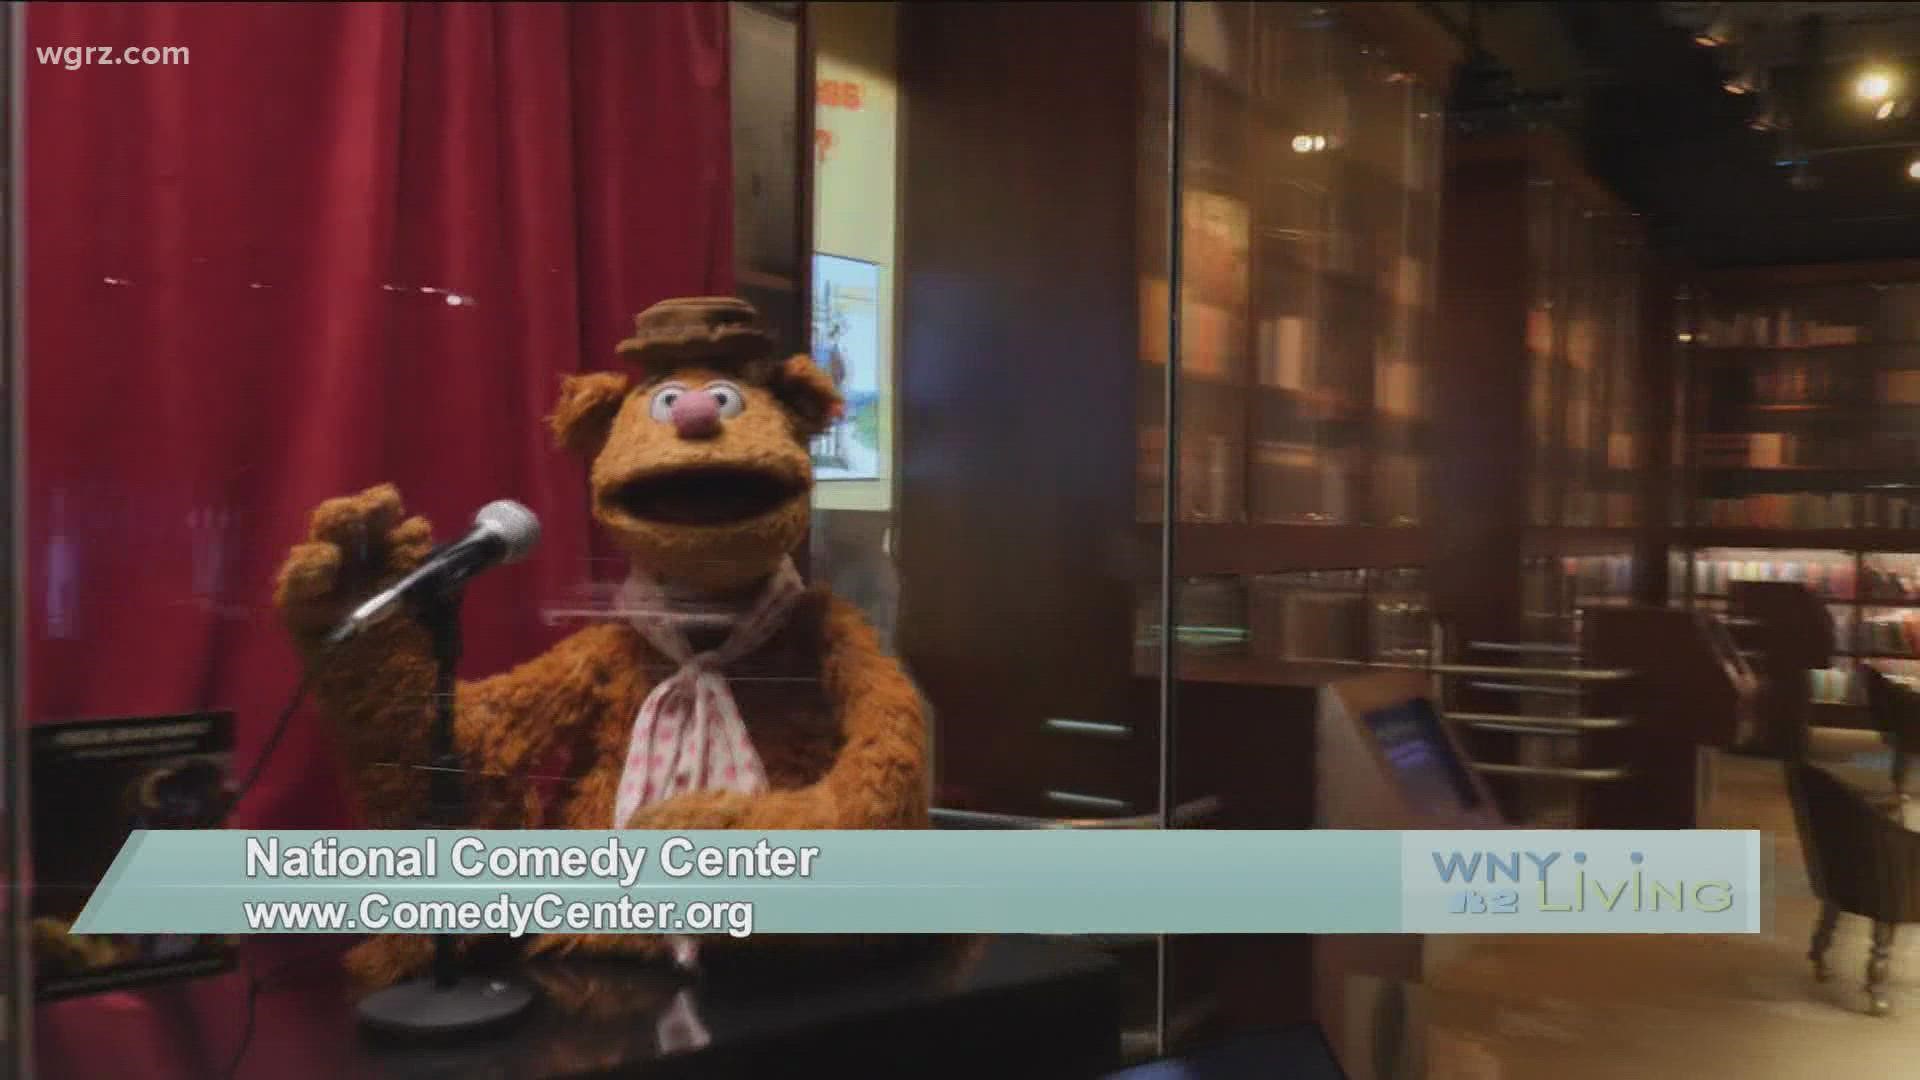 WNY Living - October 9 - National Comedy Center (THIS VIDEO IS SPONSORED BY THE NATIONAL COMEDY CENTER)